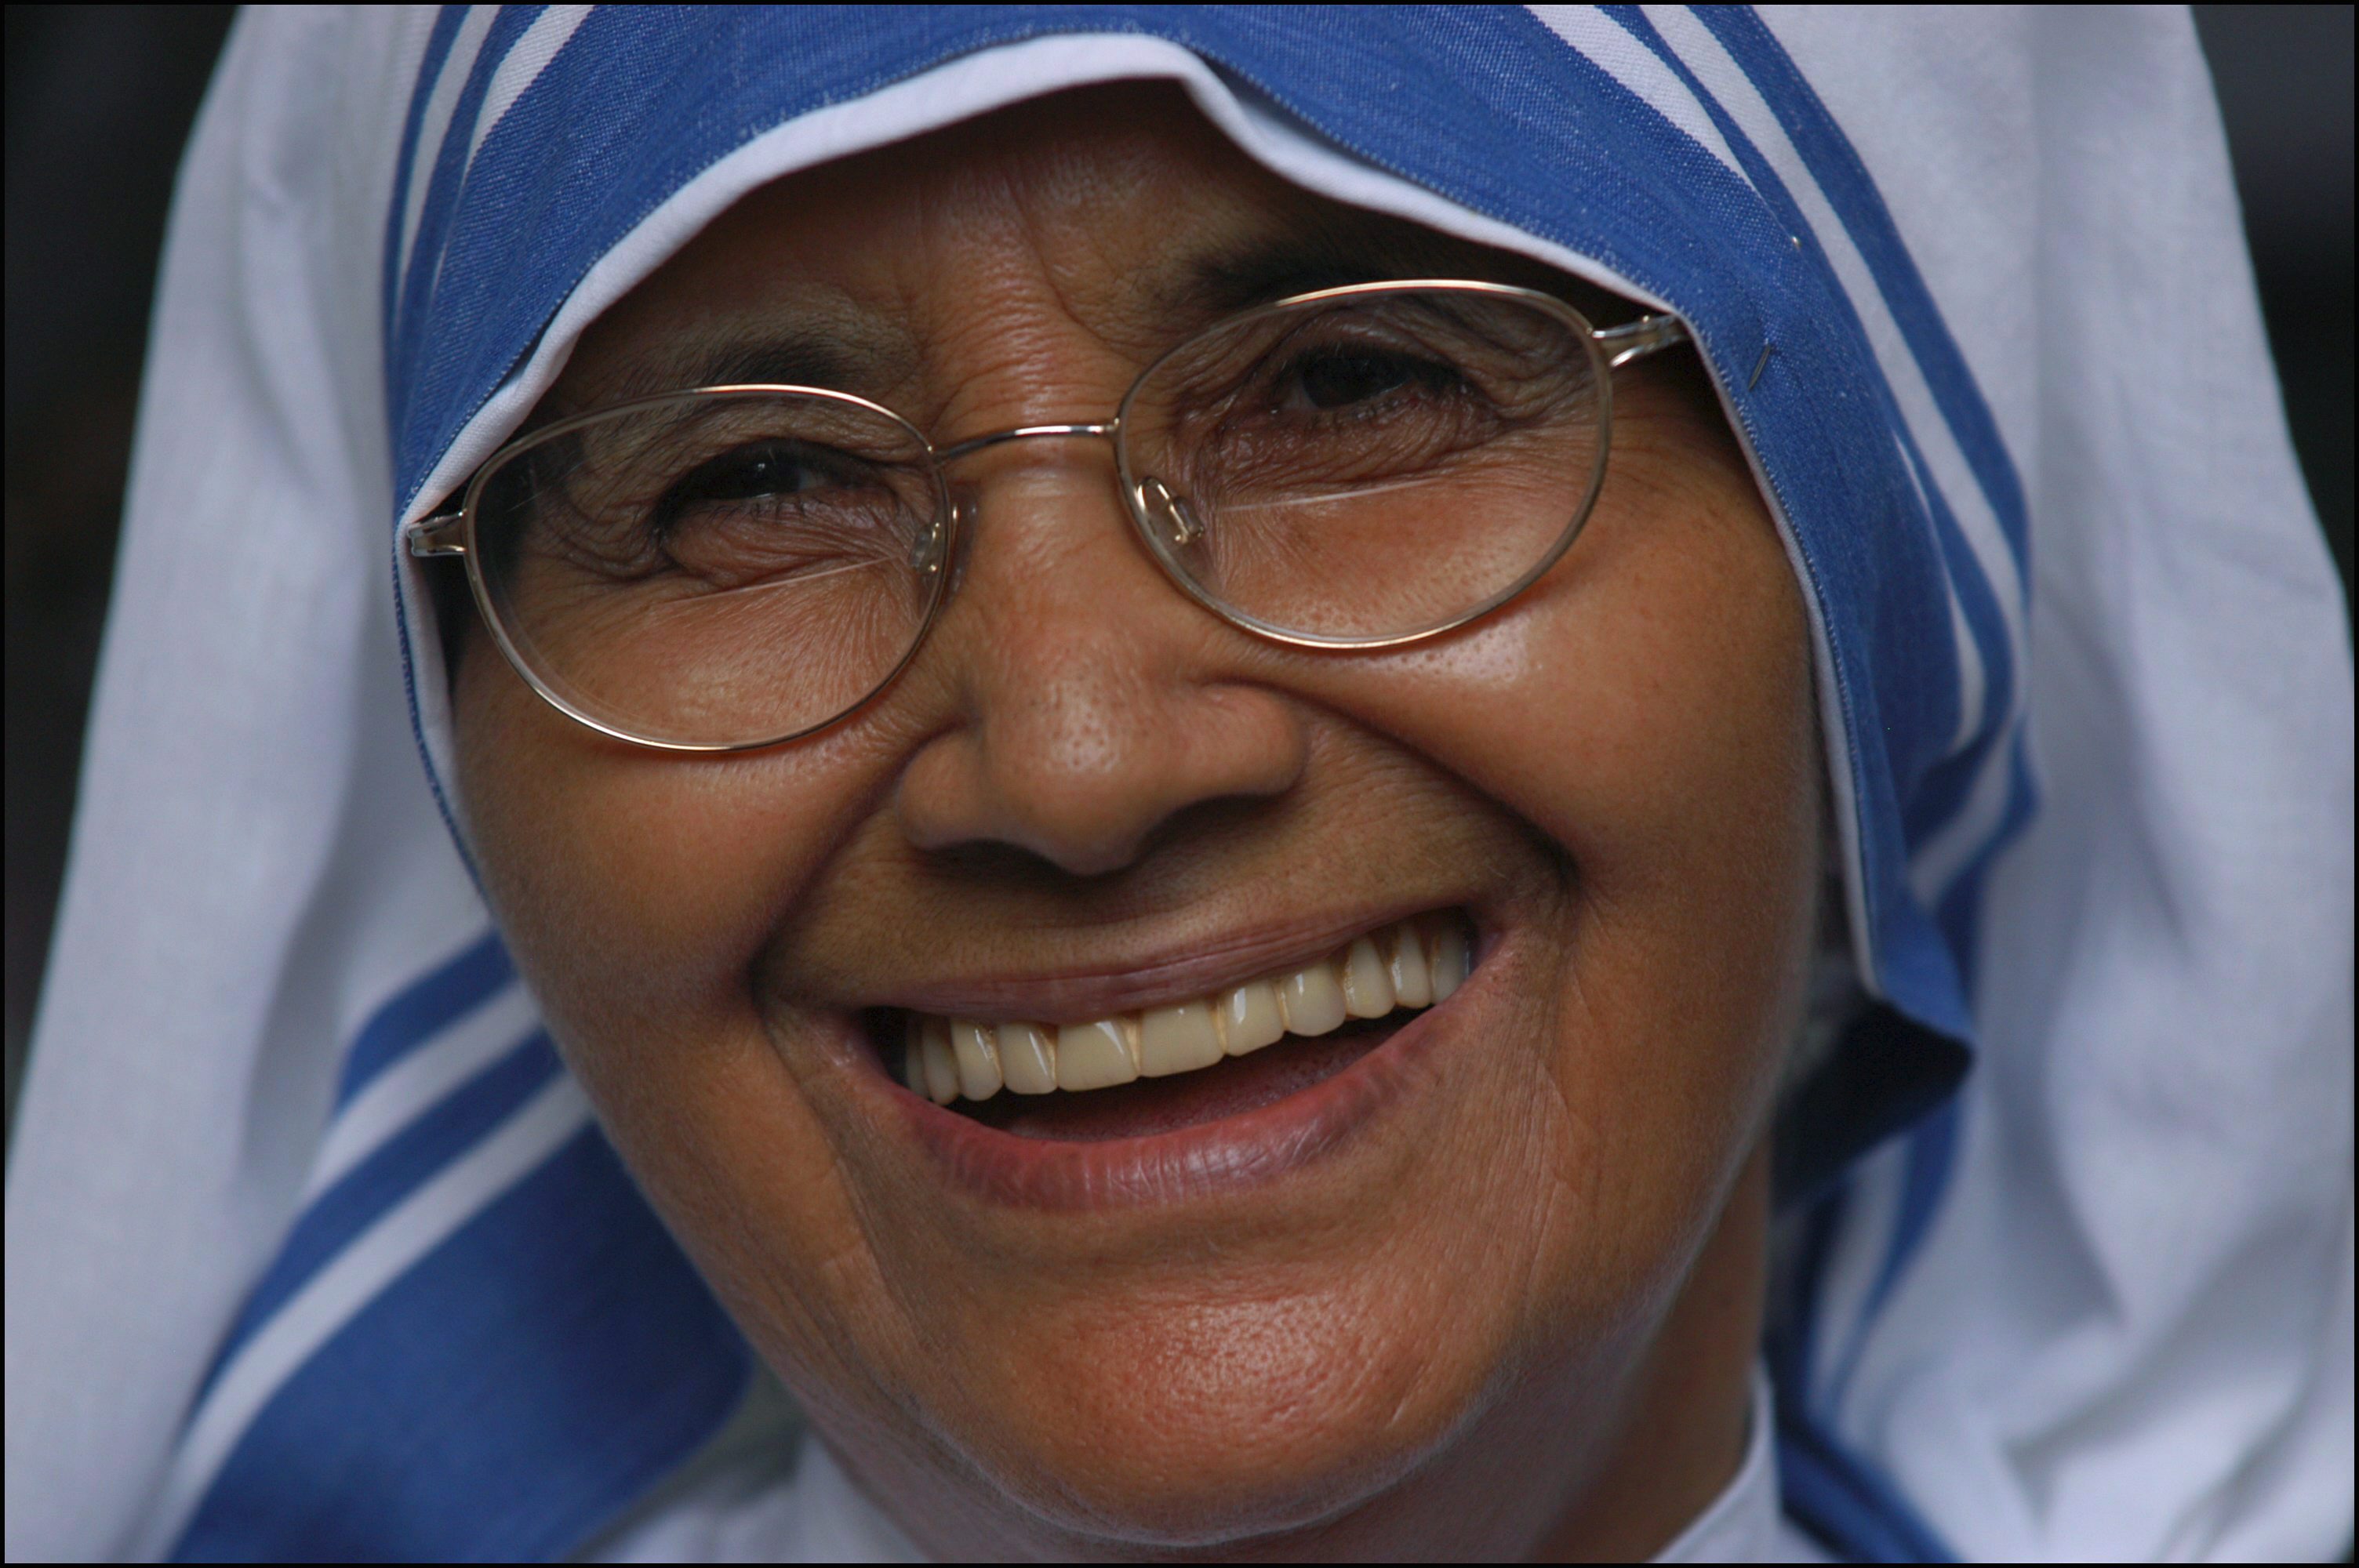 Sister Nirmala Joshi, Mother Teresa's successor as superior general of the Missionaries of Charity, in Kolkata on Sept. 1, 2003 (Jean-Michel Turpin—Gamma-Rapho/Getty Images)